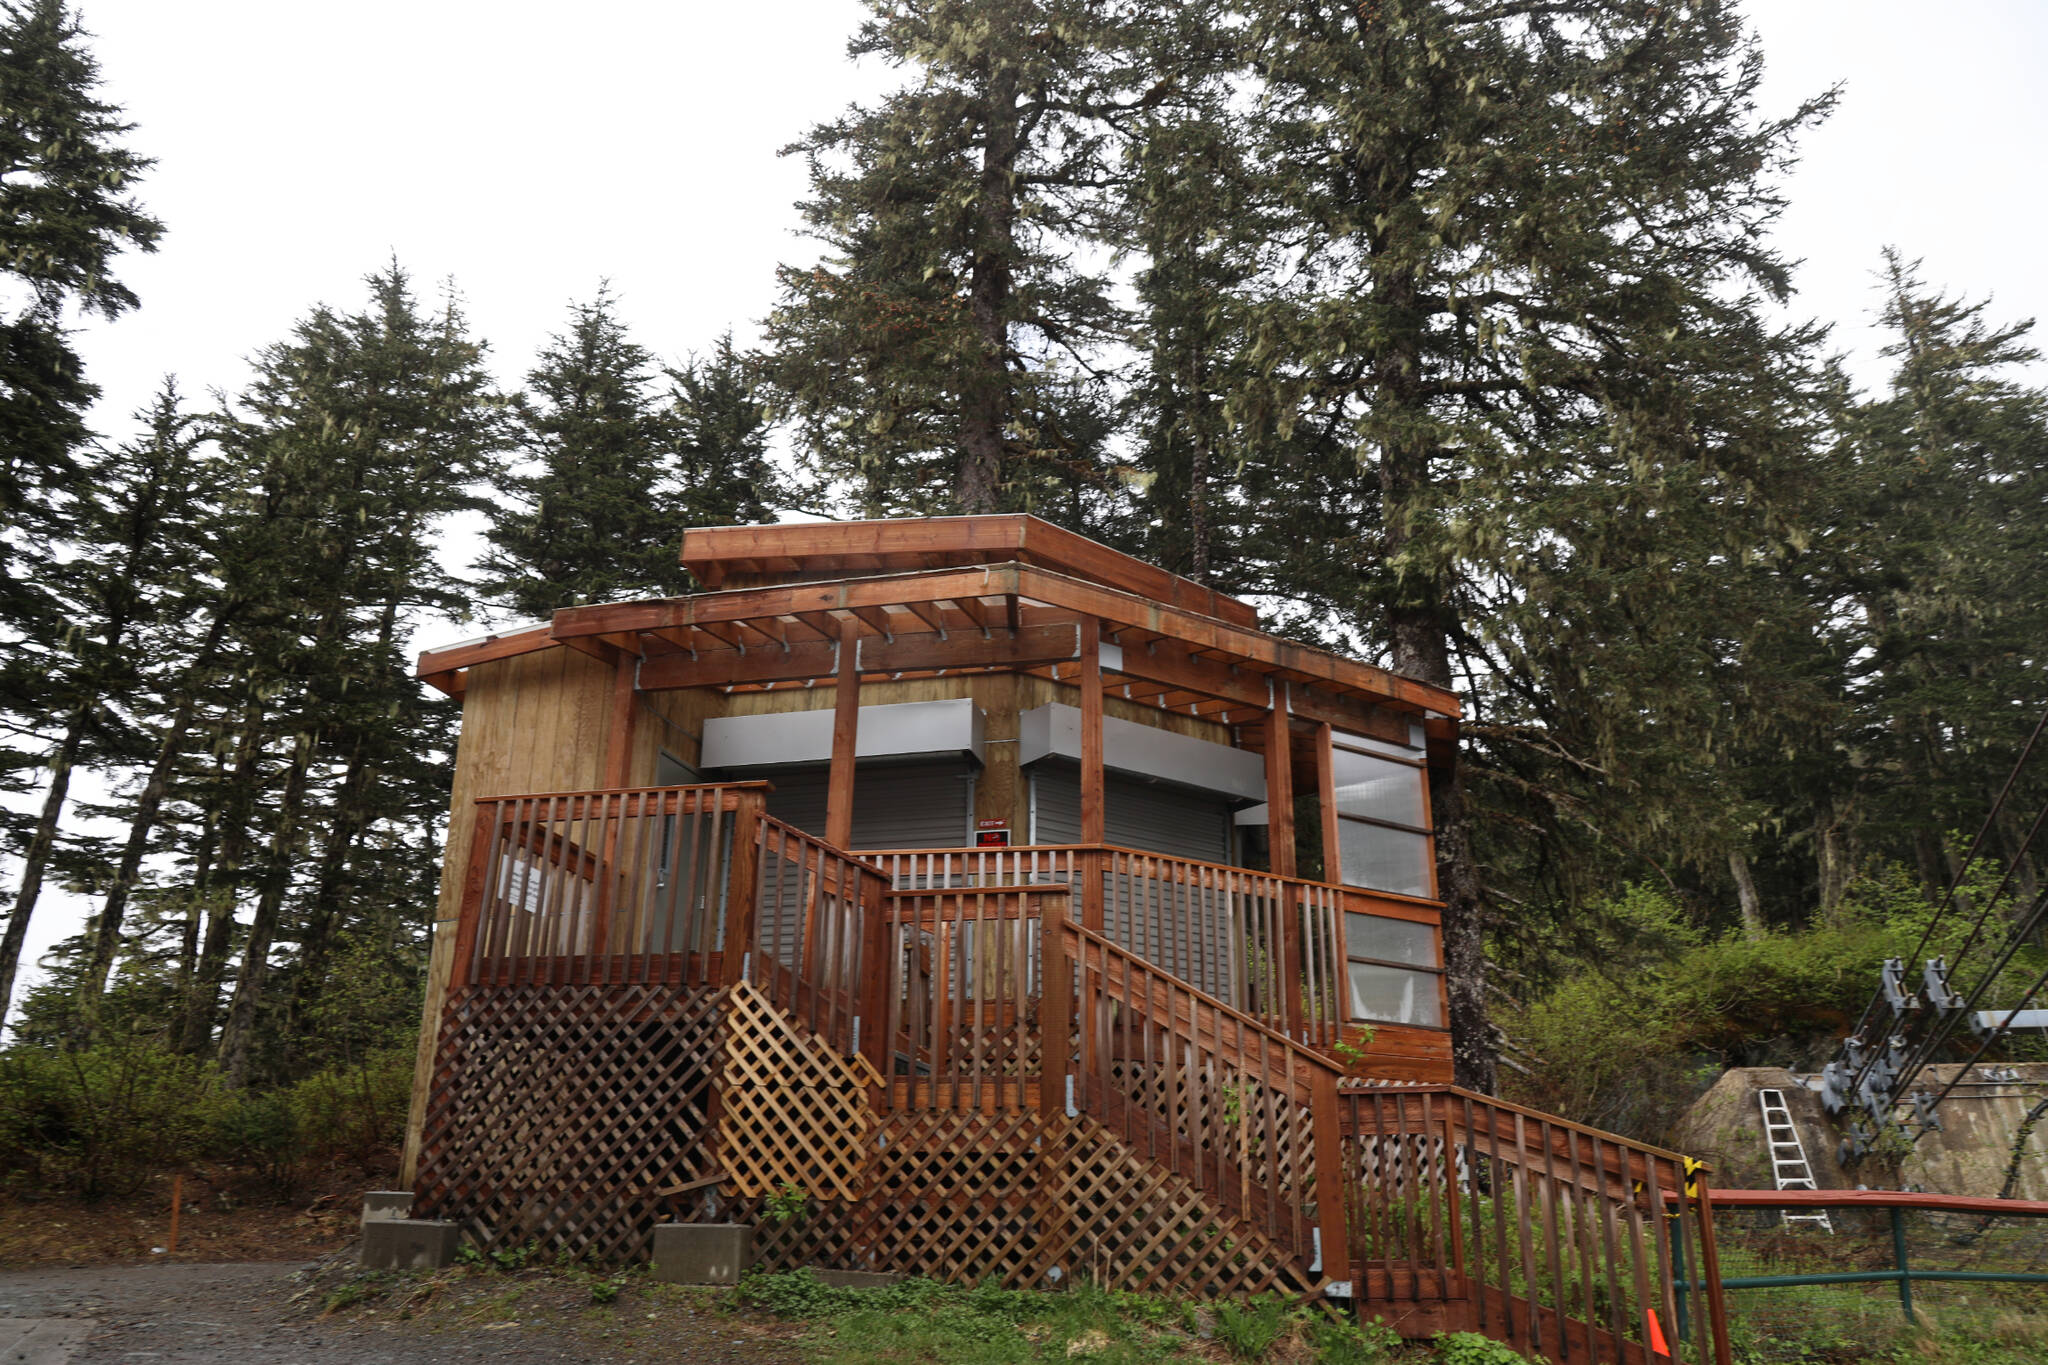 Clarise Larson / Juneau Empire
The wildlife shelter at the top of Mount Roberts sits empty Friday morning. The building future remains in limbo as it is owned by the Juneau Raptor Center, which this fall announced it would be suspending its operations by the end of 2023.